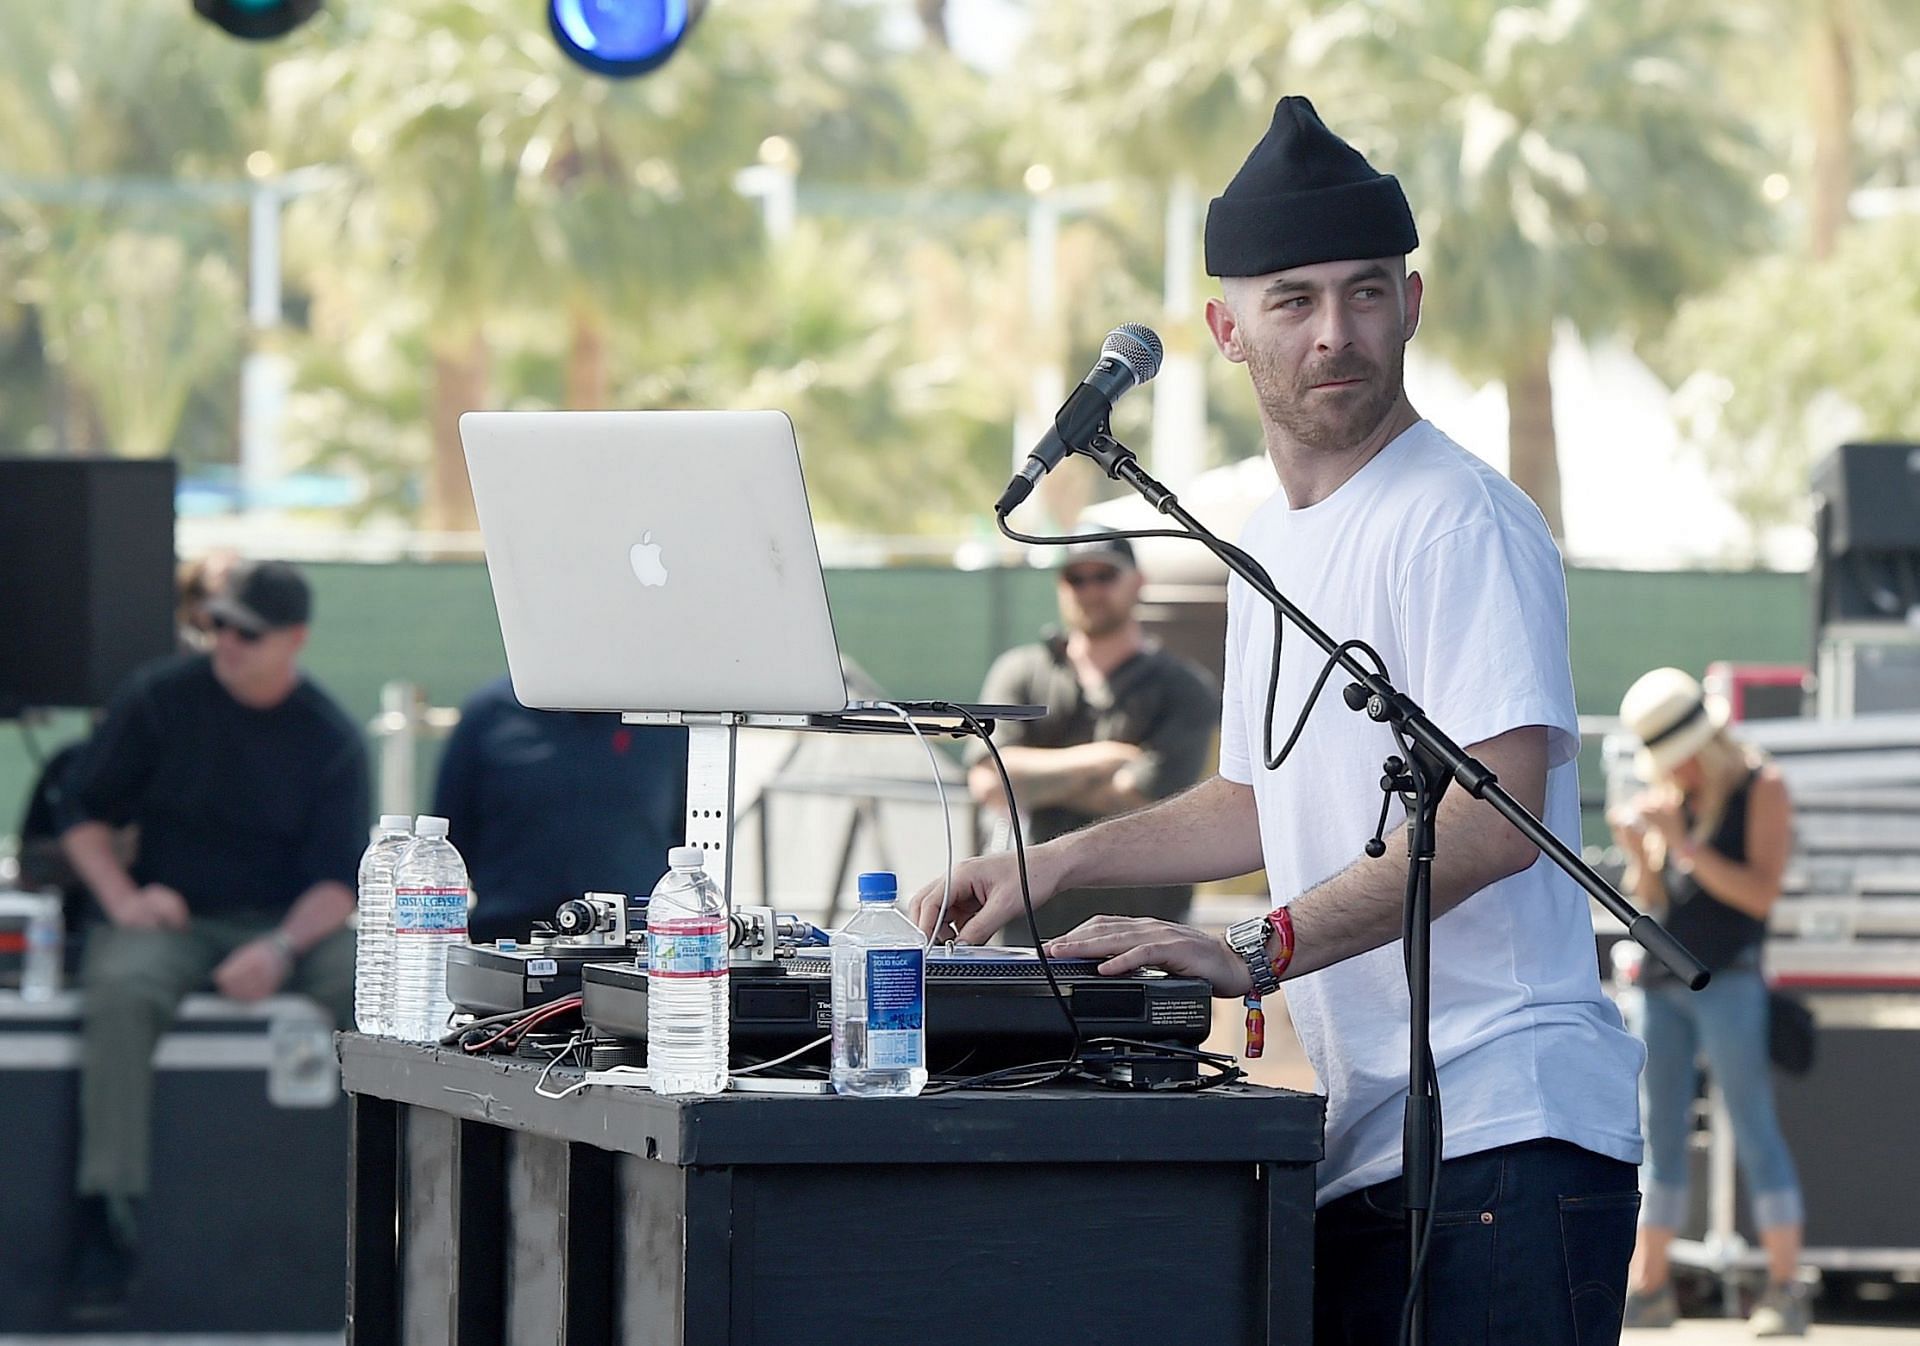 DJ Alchemist with recording artist Action Bronson onstage at the 2015 Coachella Valley Music &amp; Arts Festival (Weekend 1) in Indio, California. (Photo by Kevin Winter/Getty Images for Coachella)